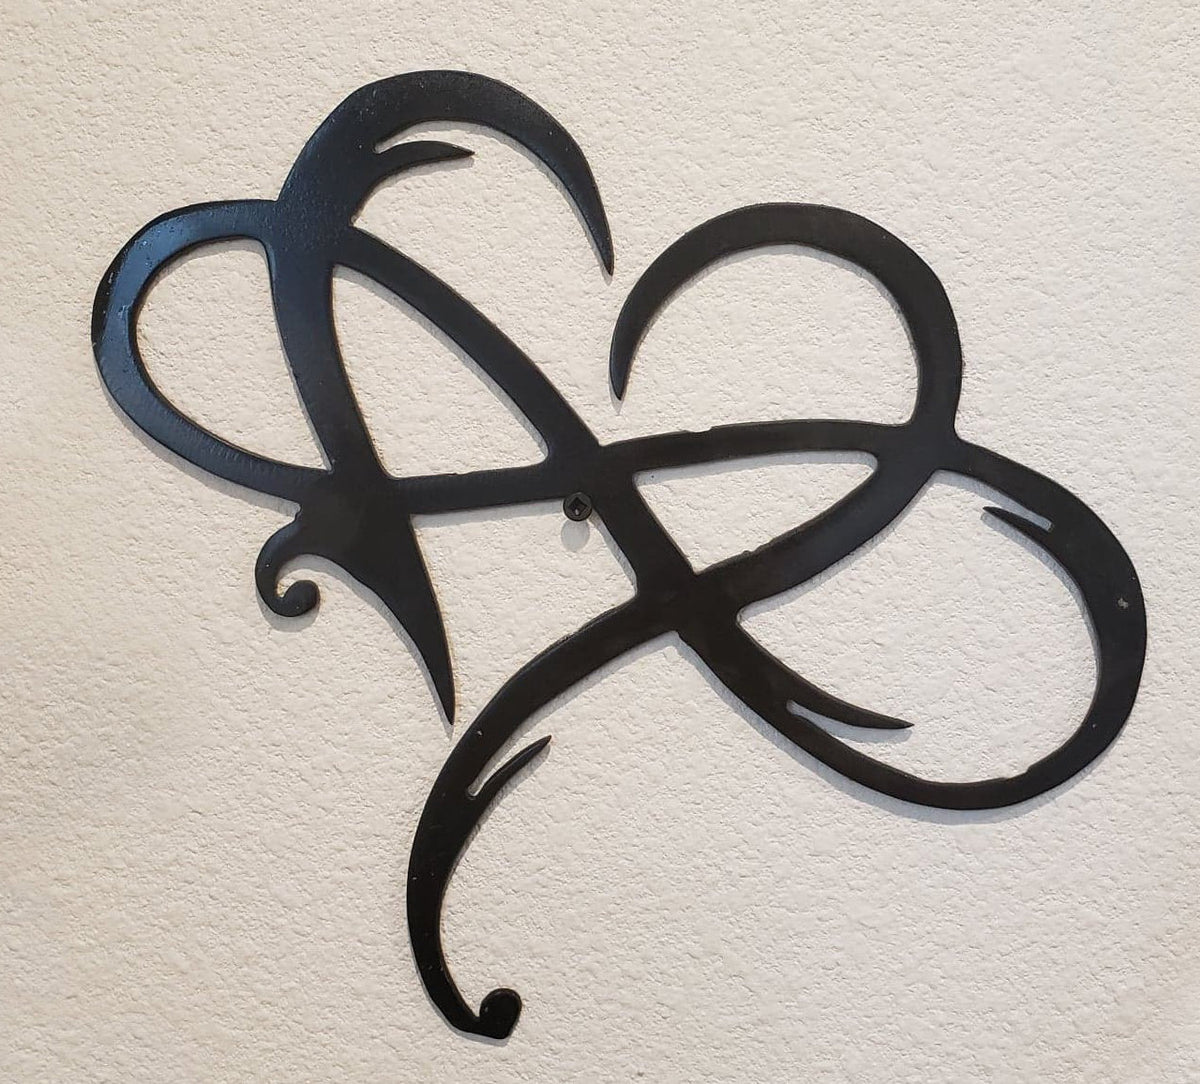  INFUNLY Heart Metal Stencil for Painting Stainless